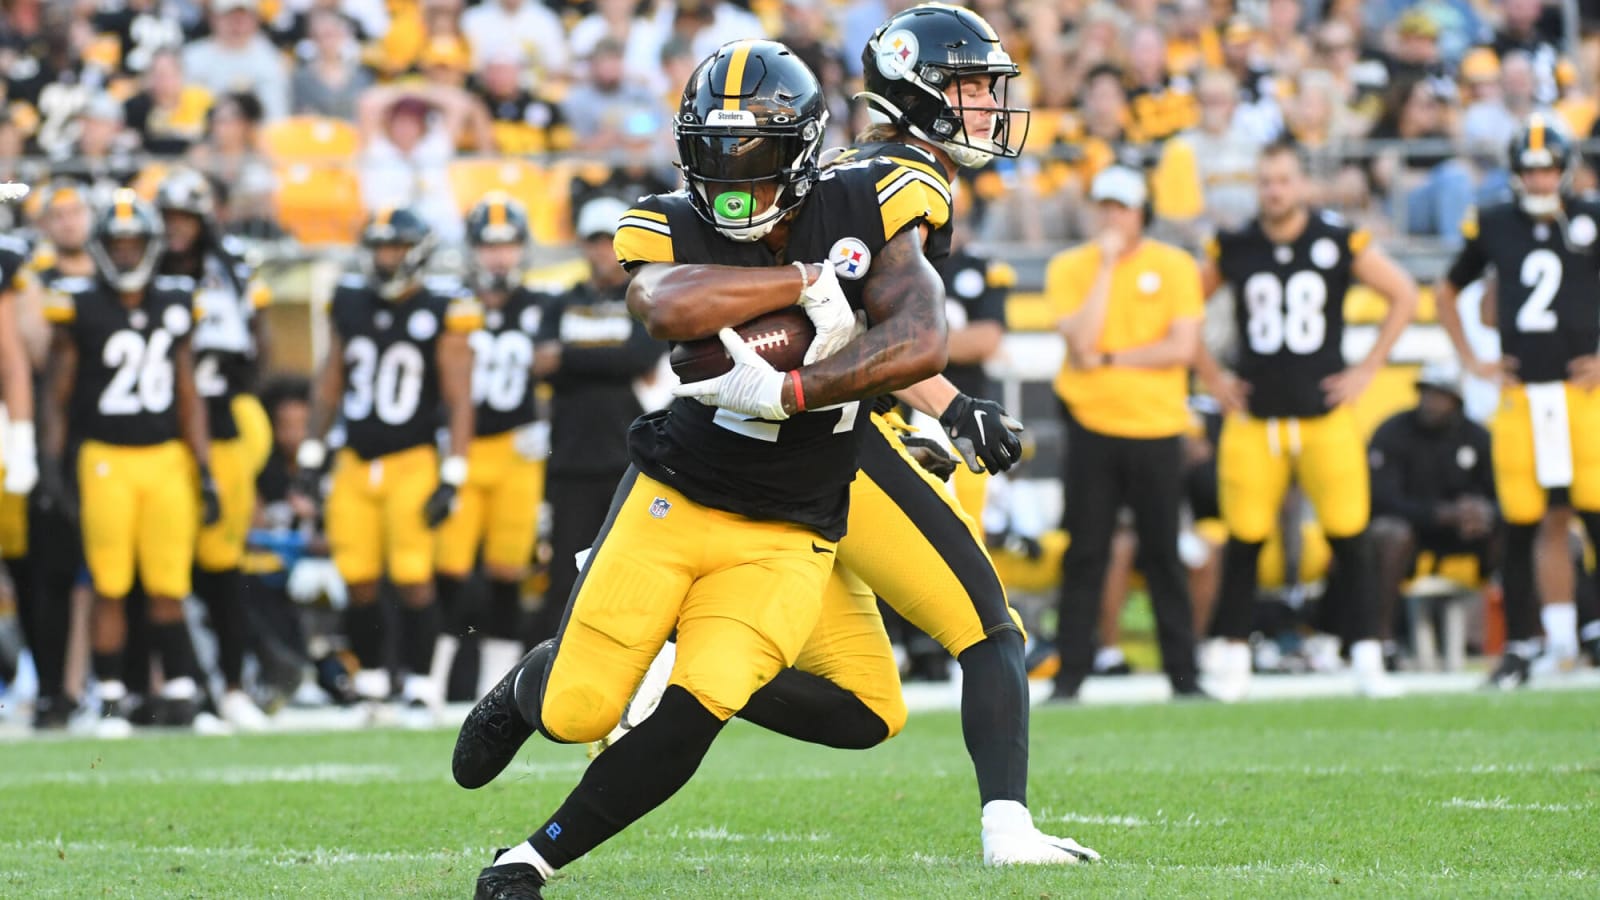 Former Steelers Returner To Miss Week 1 Matchup Due To Wrist Injury; Benny Snell Jr. Heads To NFC North